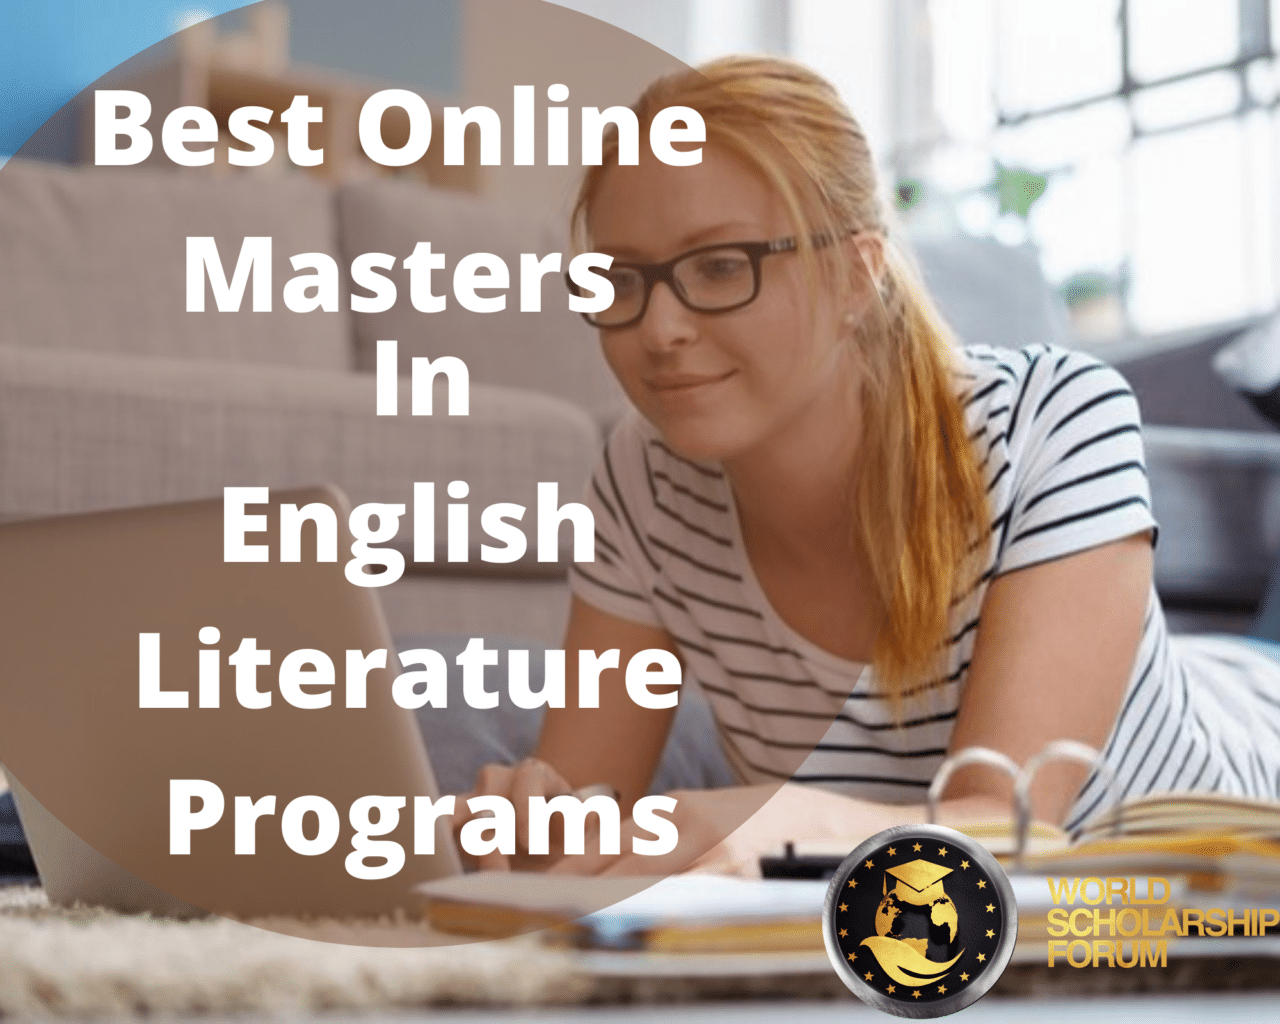 Best-Online-Masters-in-English-Literature-Programs